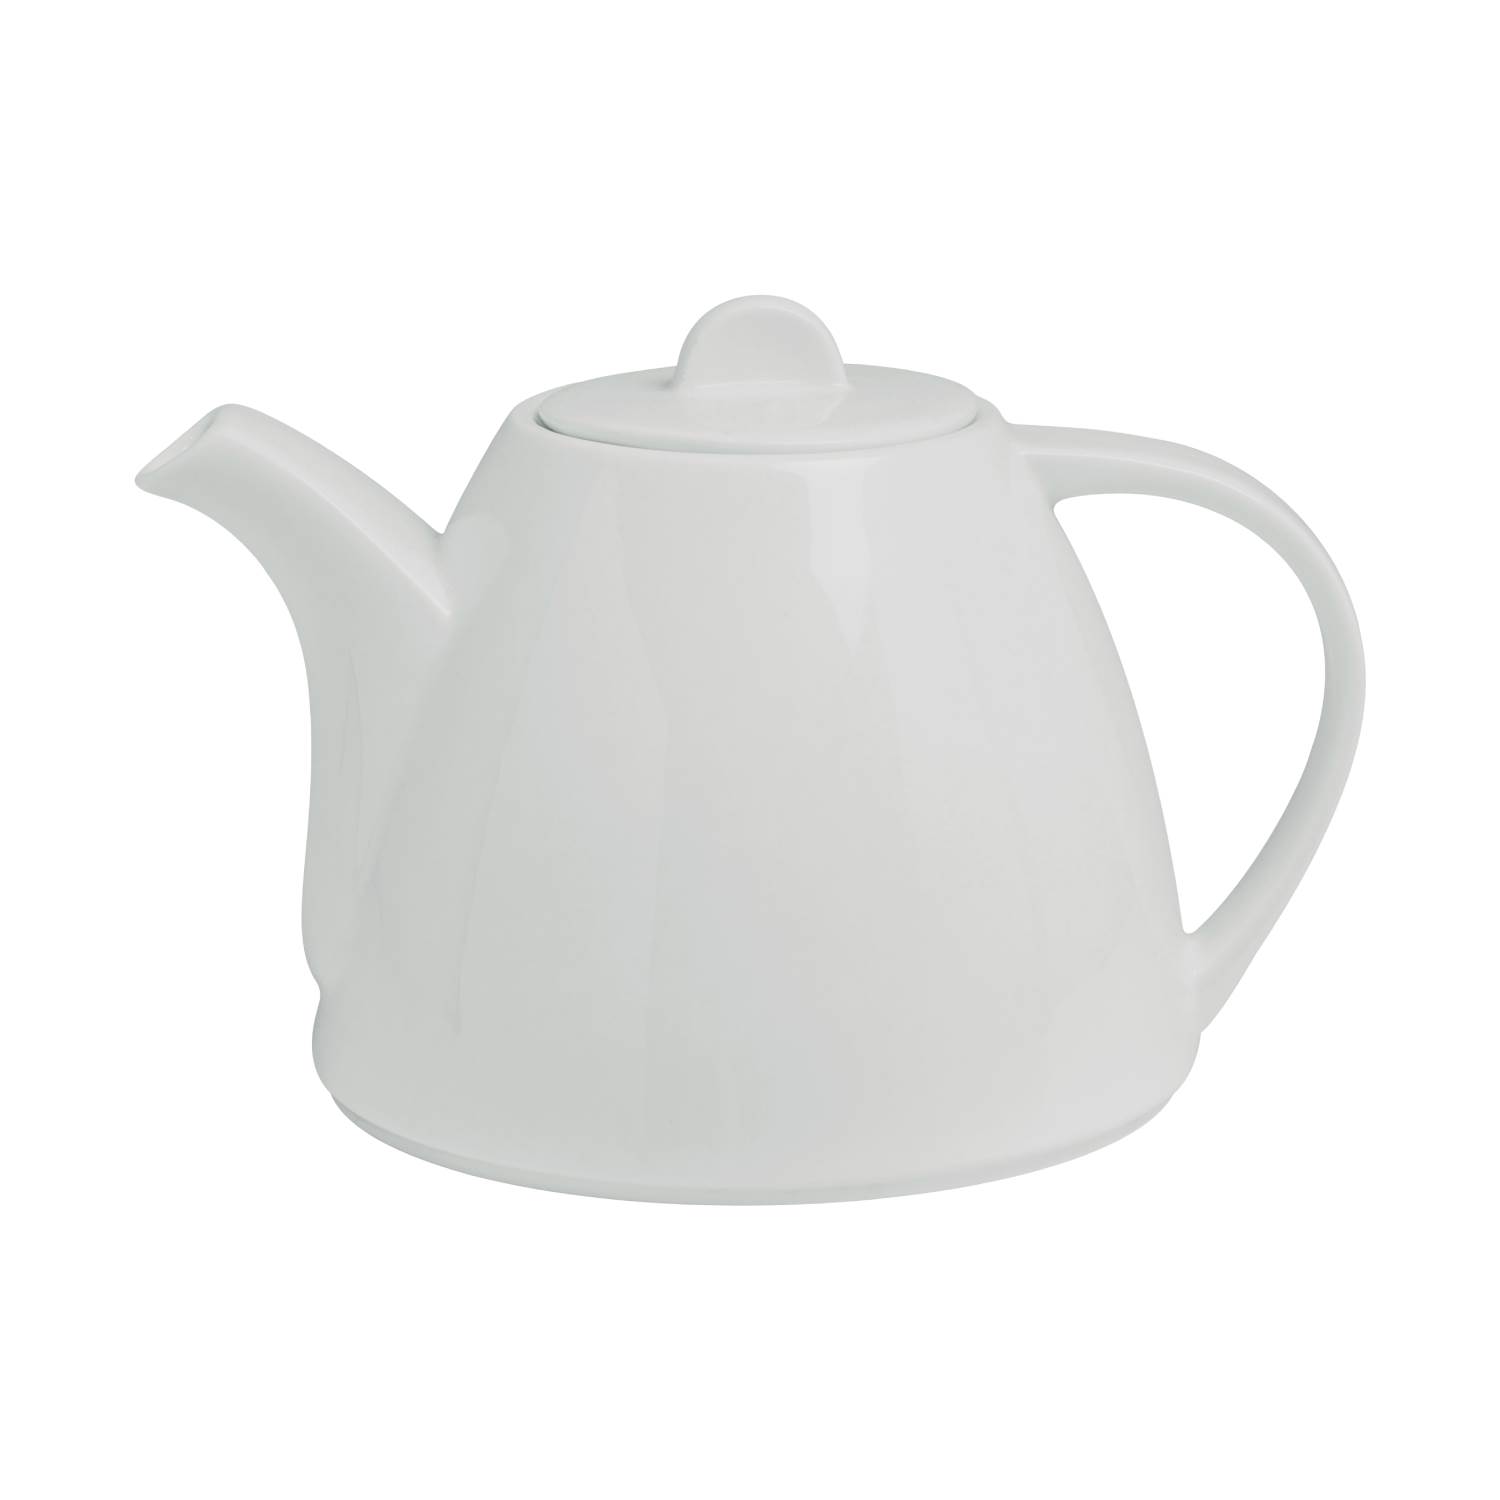 Baralee Simple Plus Coffee Pot With Lid